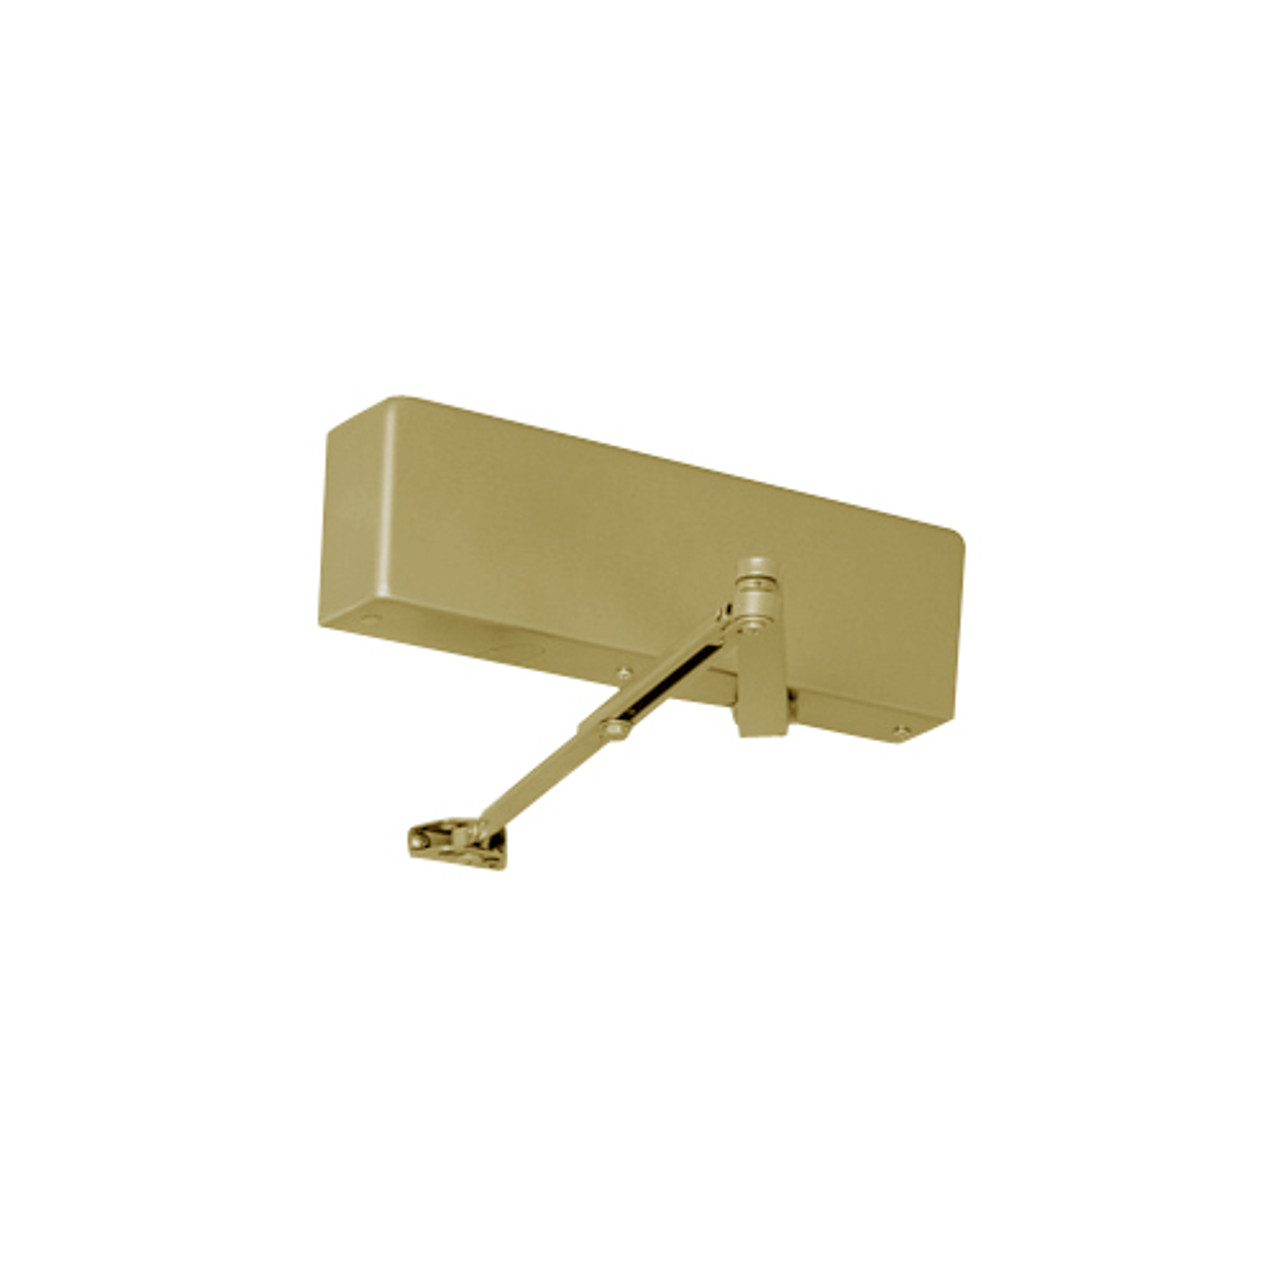 J7530M-696 Norton 7500 Series Non-Hold Open Institutional Door Closer with Top Jamb Only Reveals 0 to 3 inch in Gold Finish